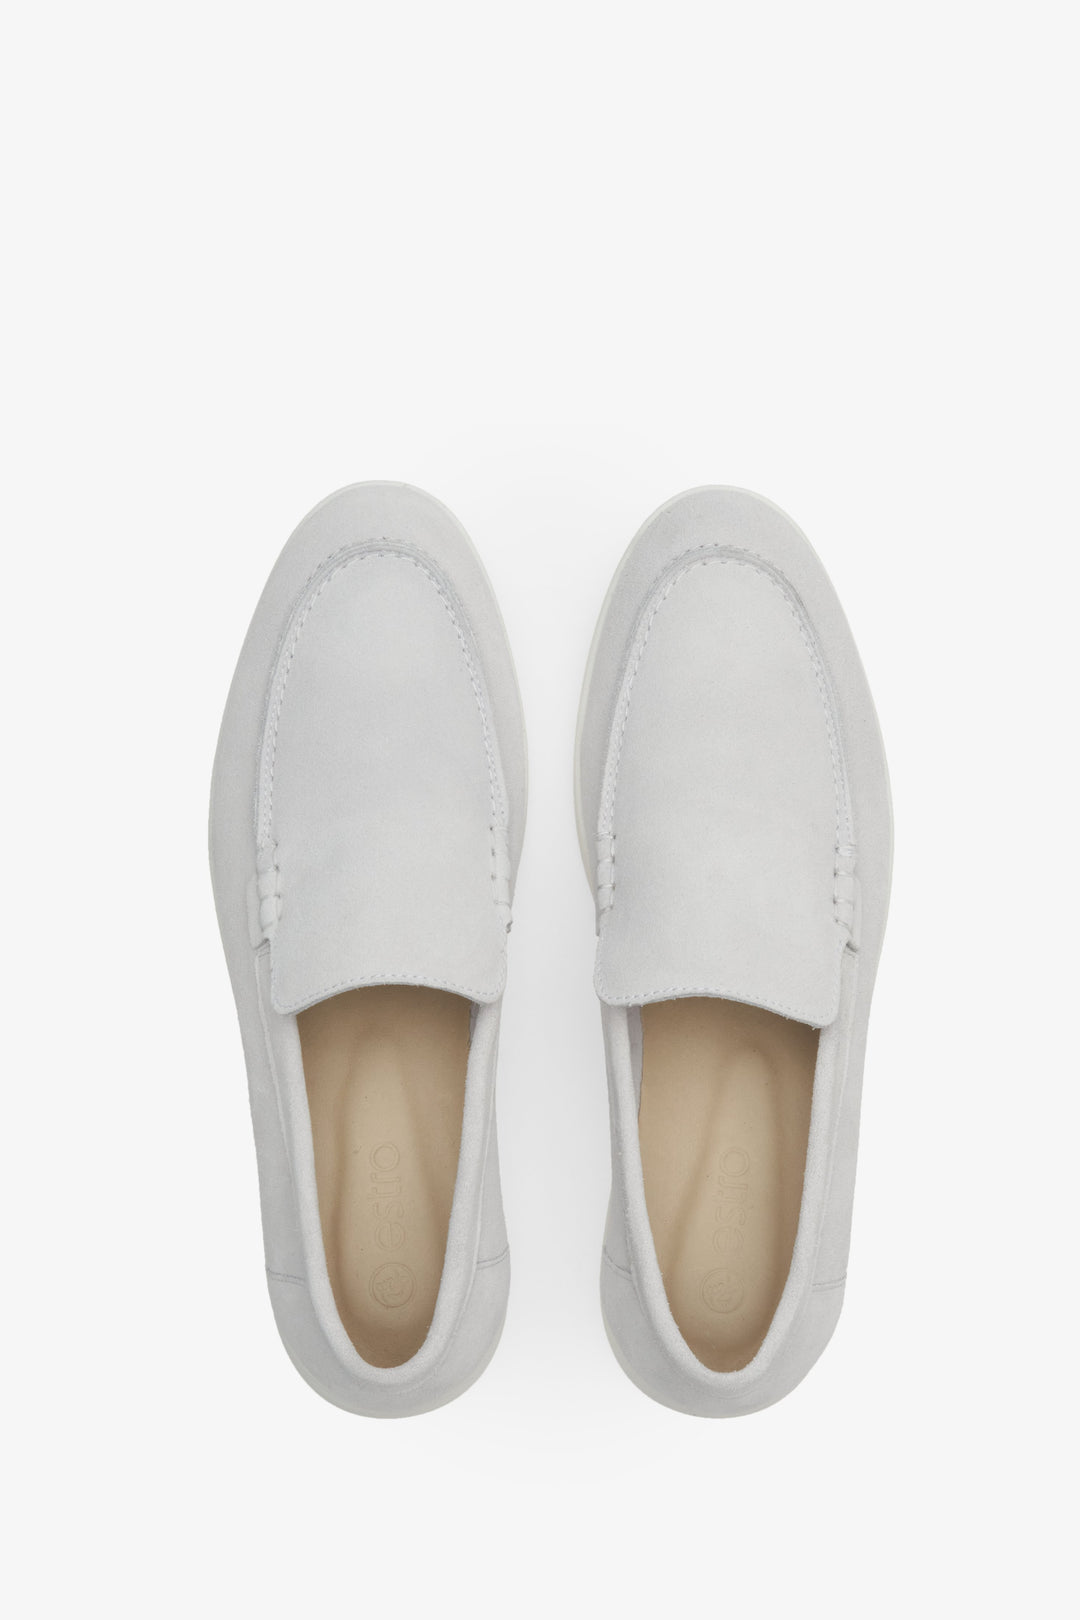 Women's suede moccasins in light grey Estro - presentation of footwear from above.